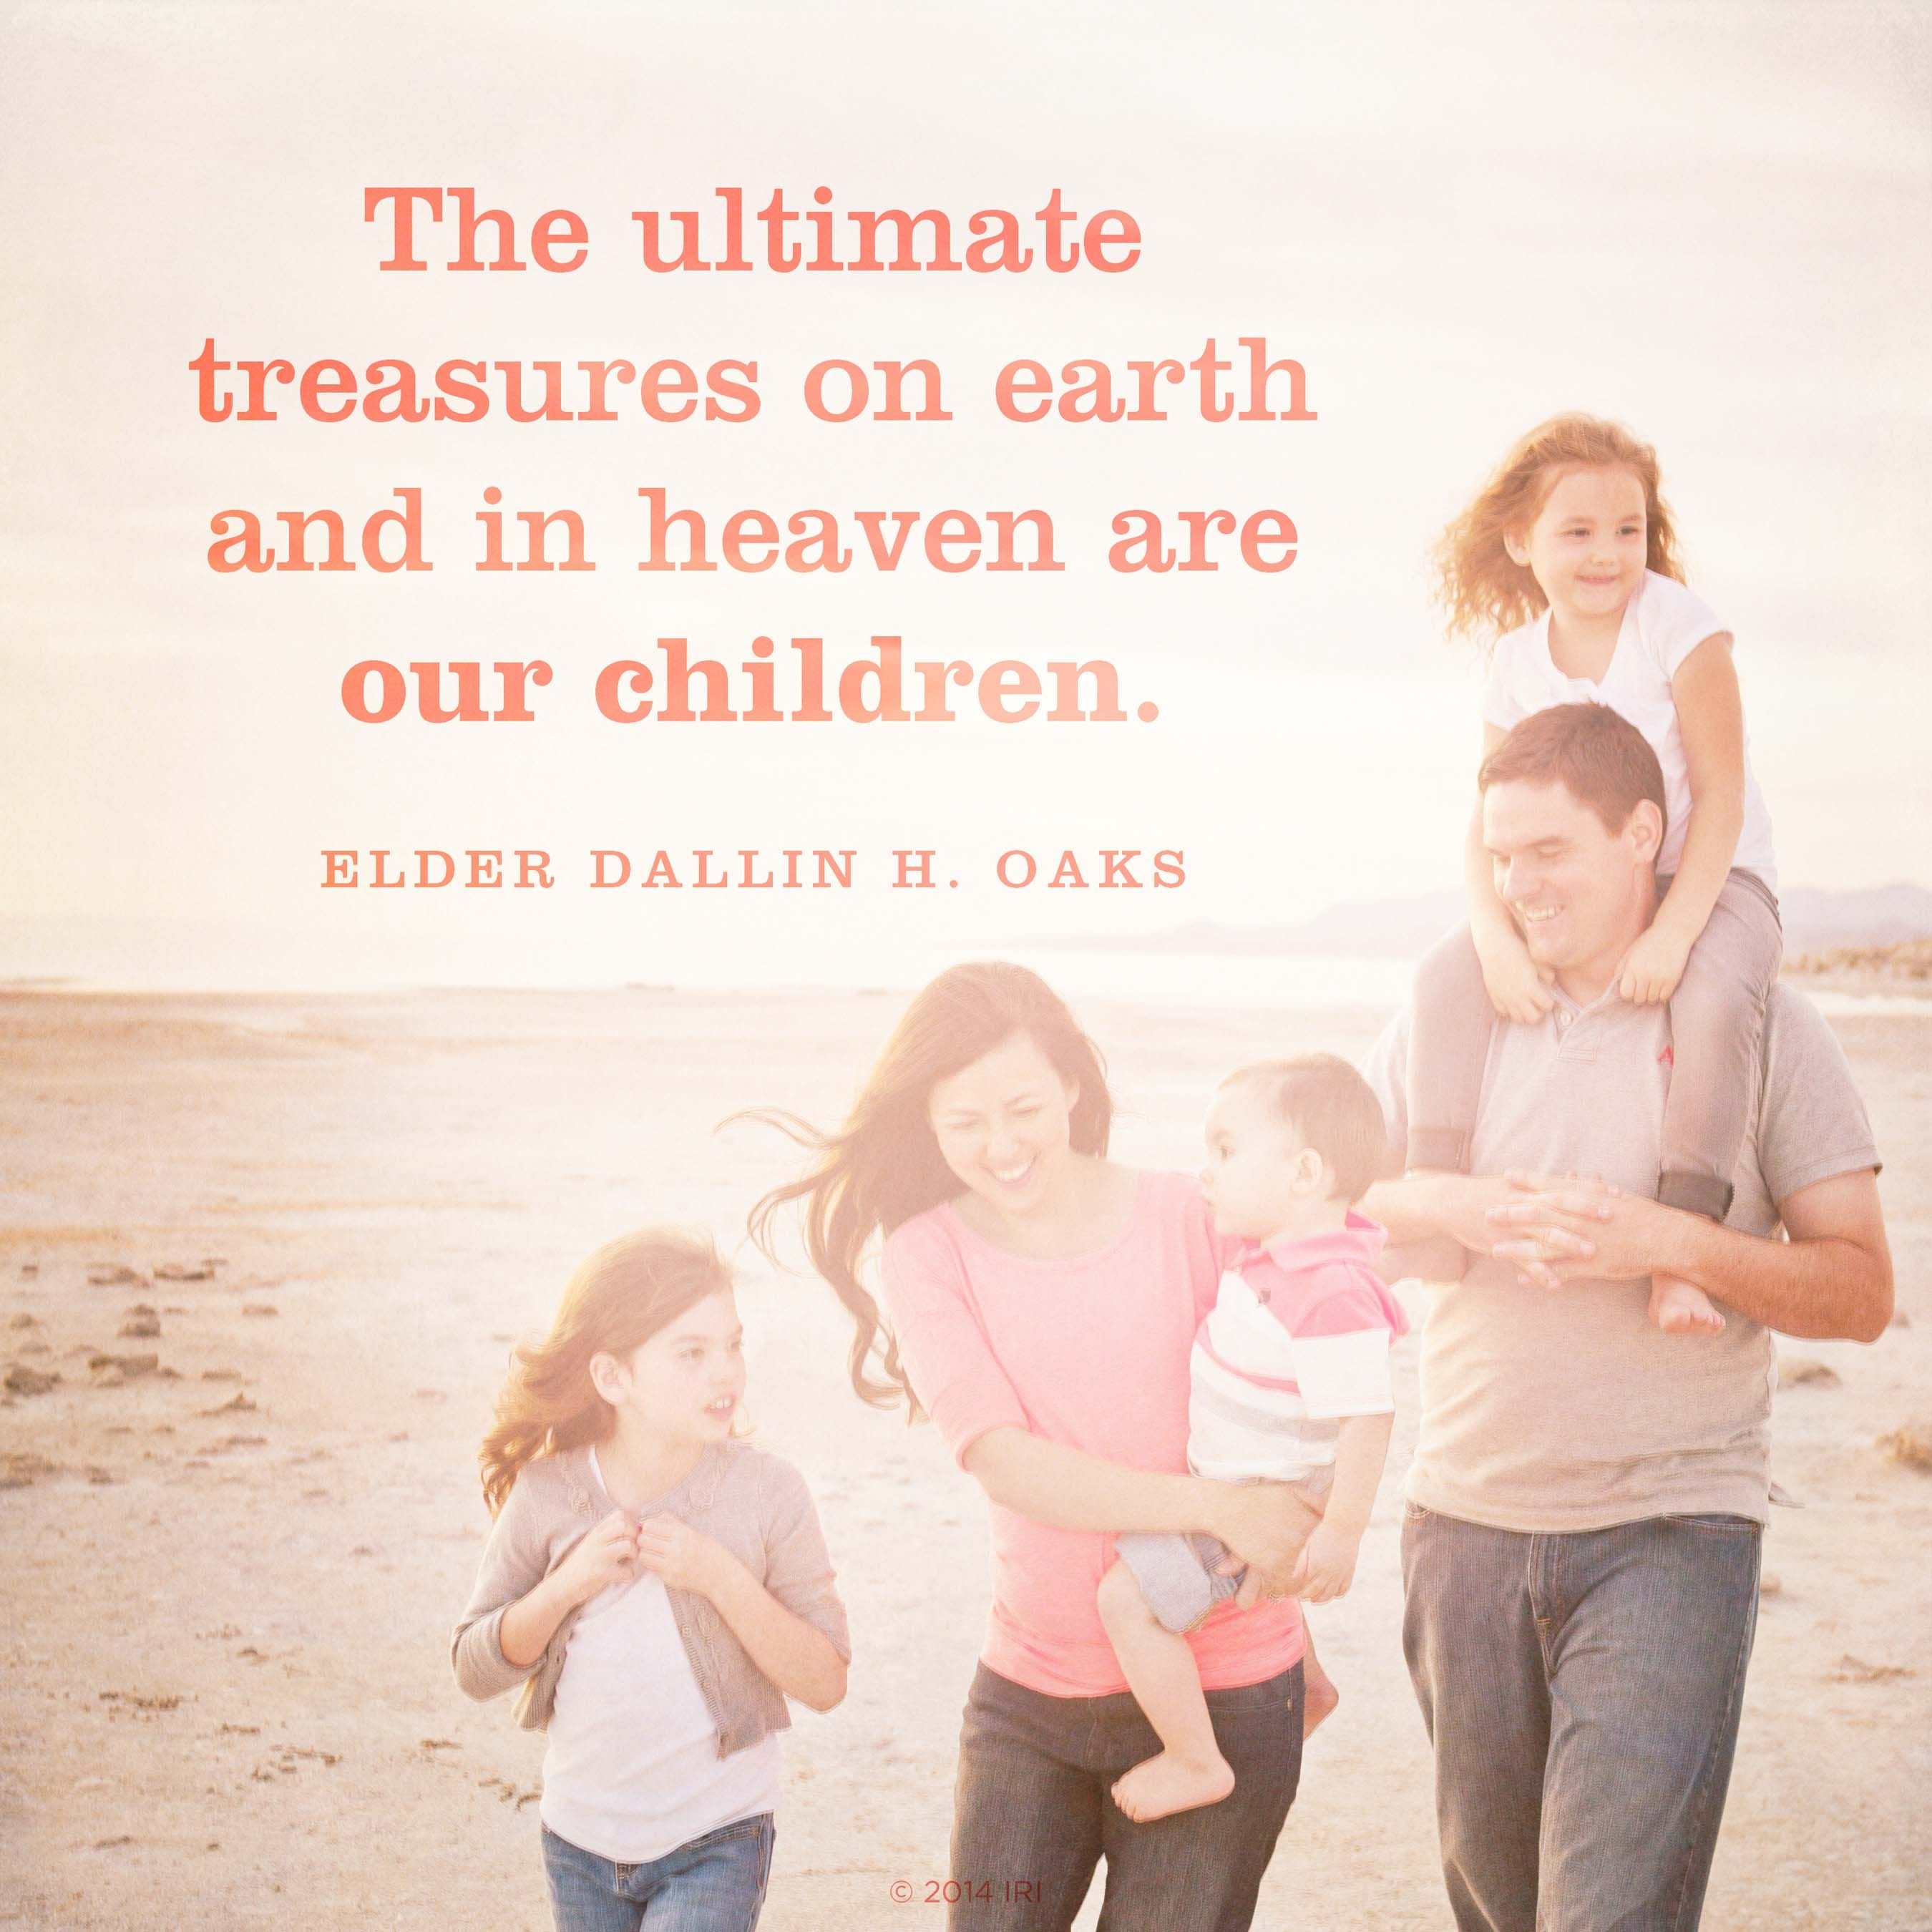 “The ultimate treasures on earth and in heaven are our children.”—Elder Dallin H. Oaks, “The Great Plan of Happiness”